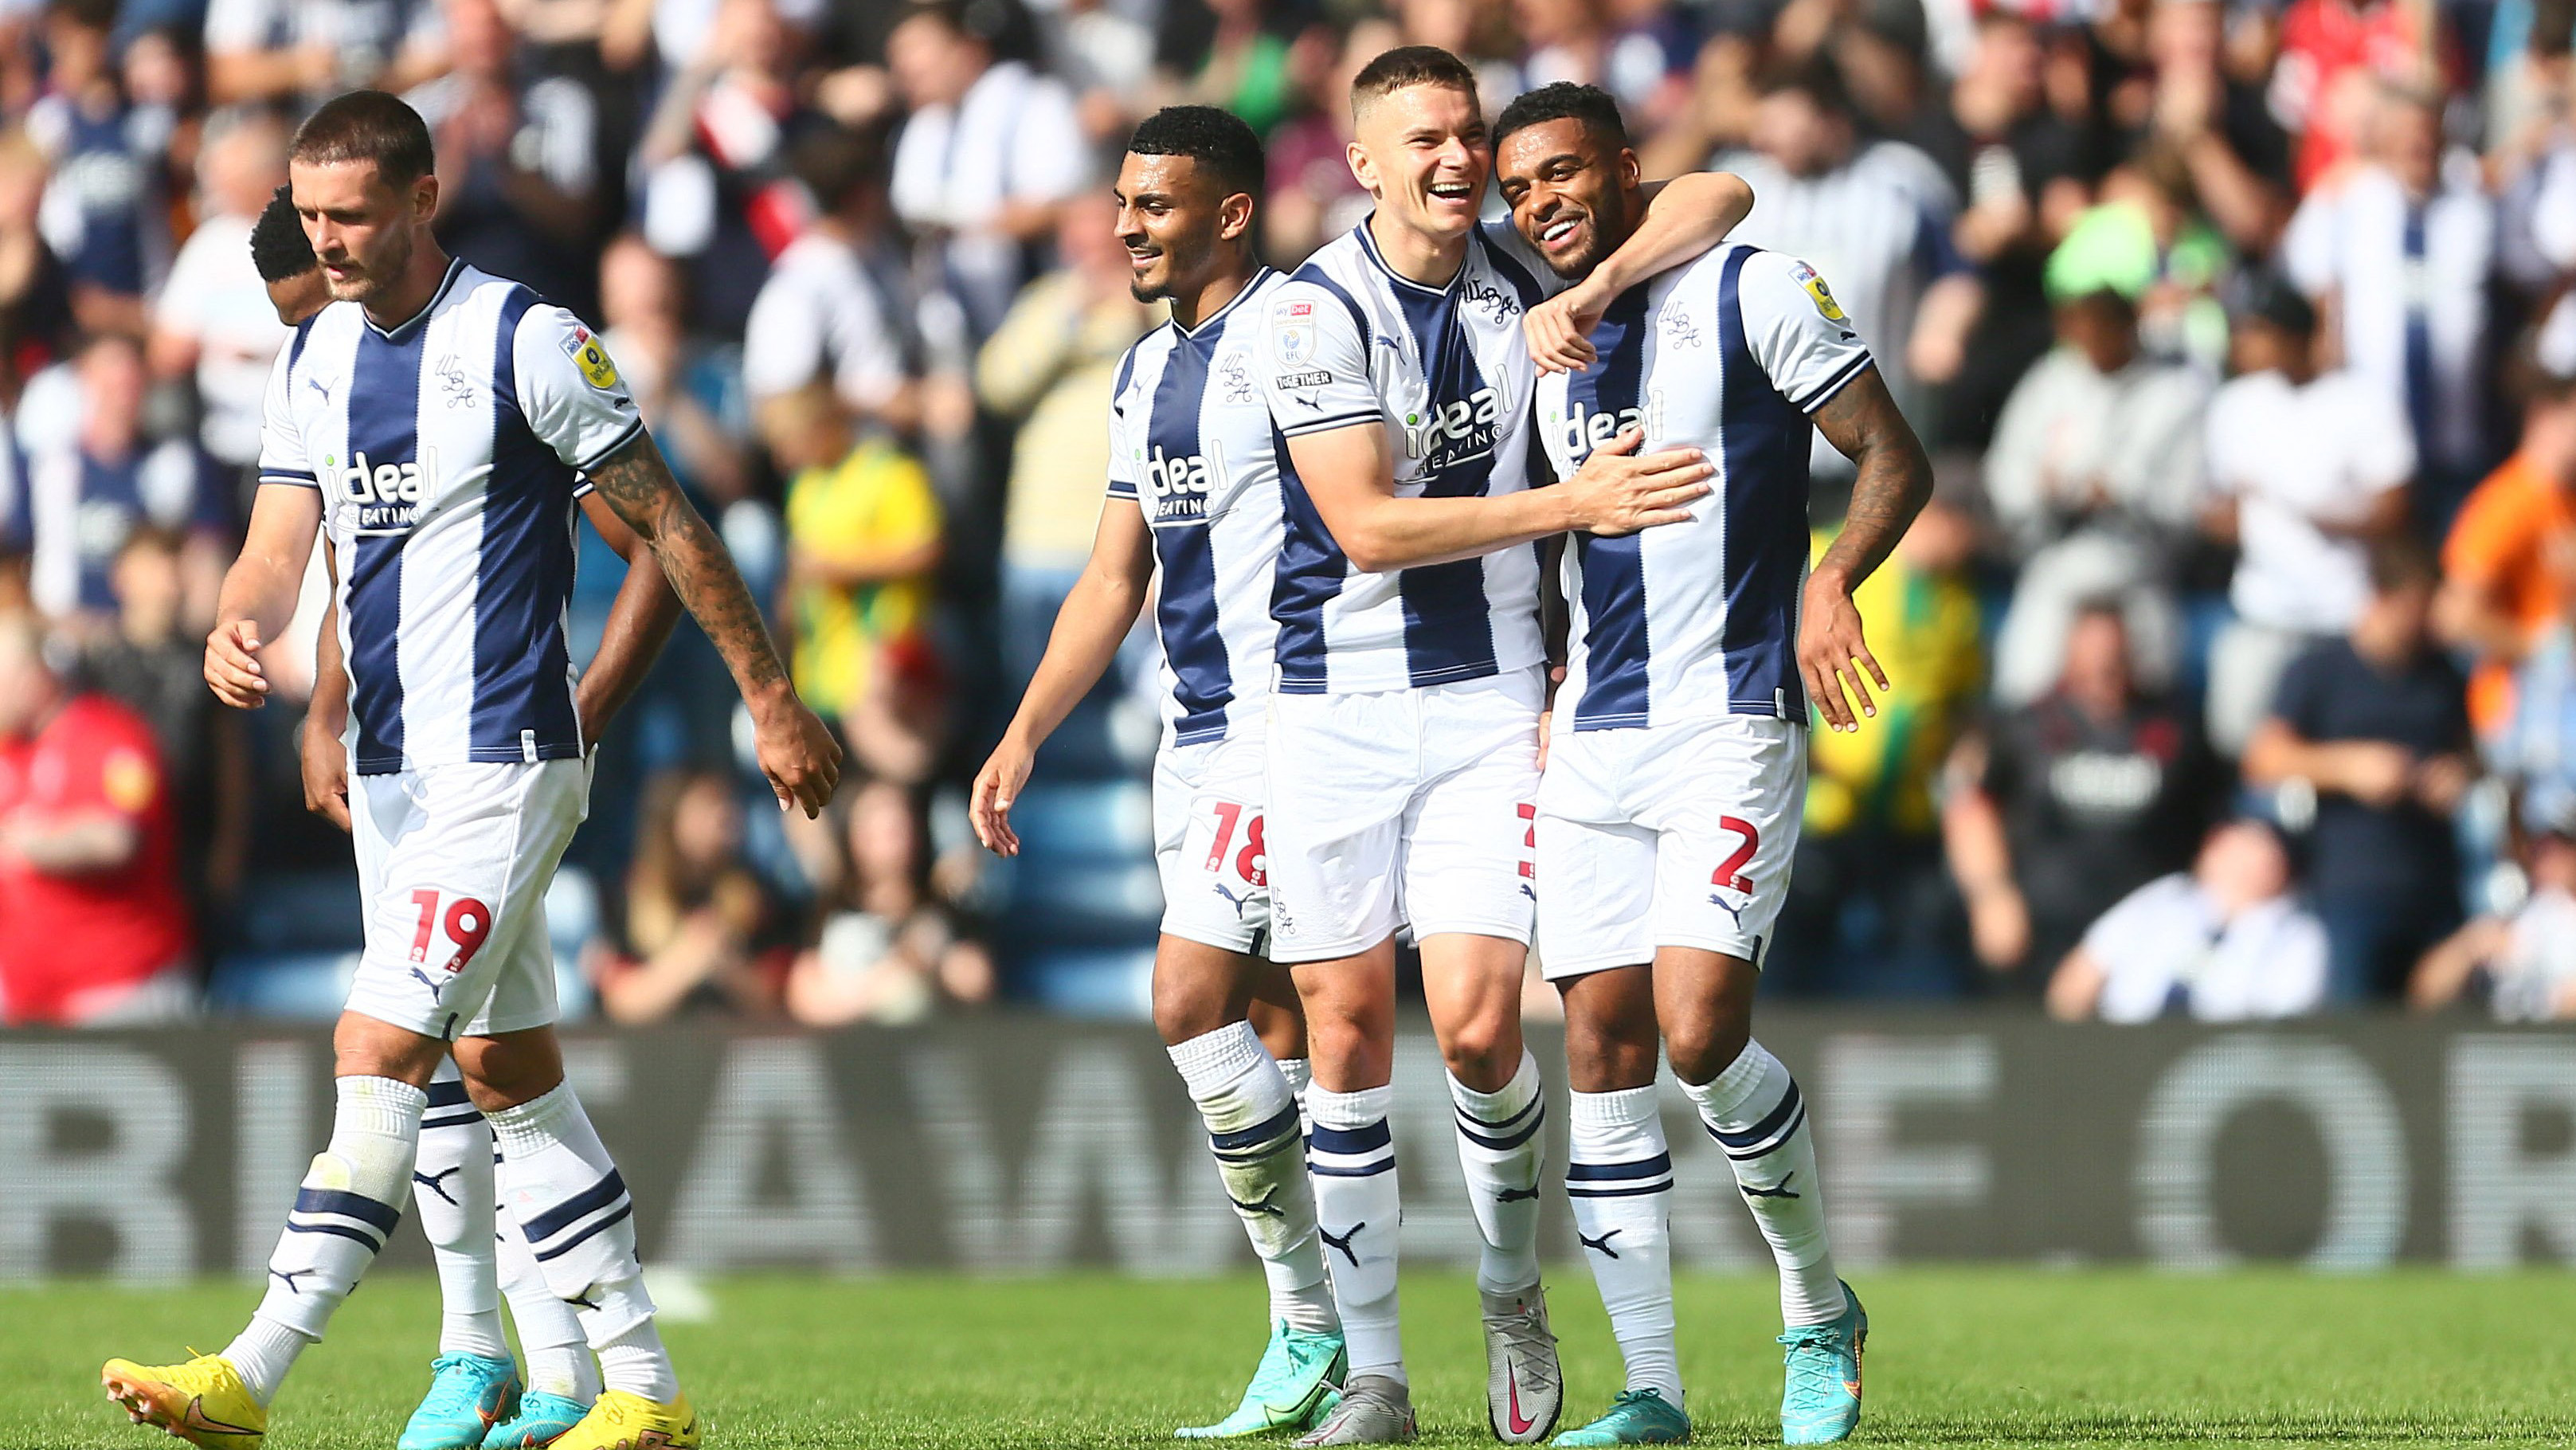 Meet the opposition, West Bromwich Albion